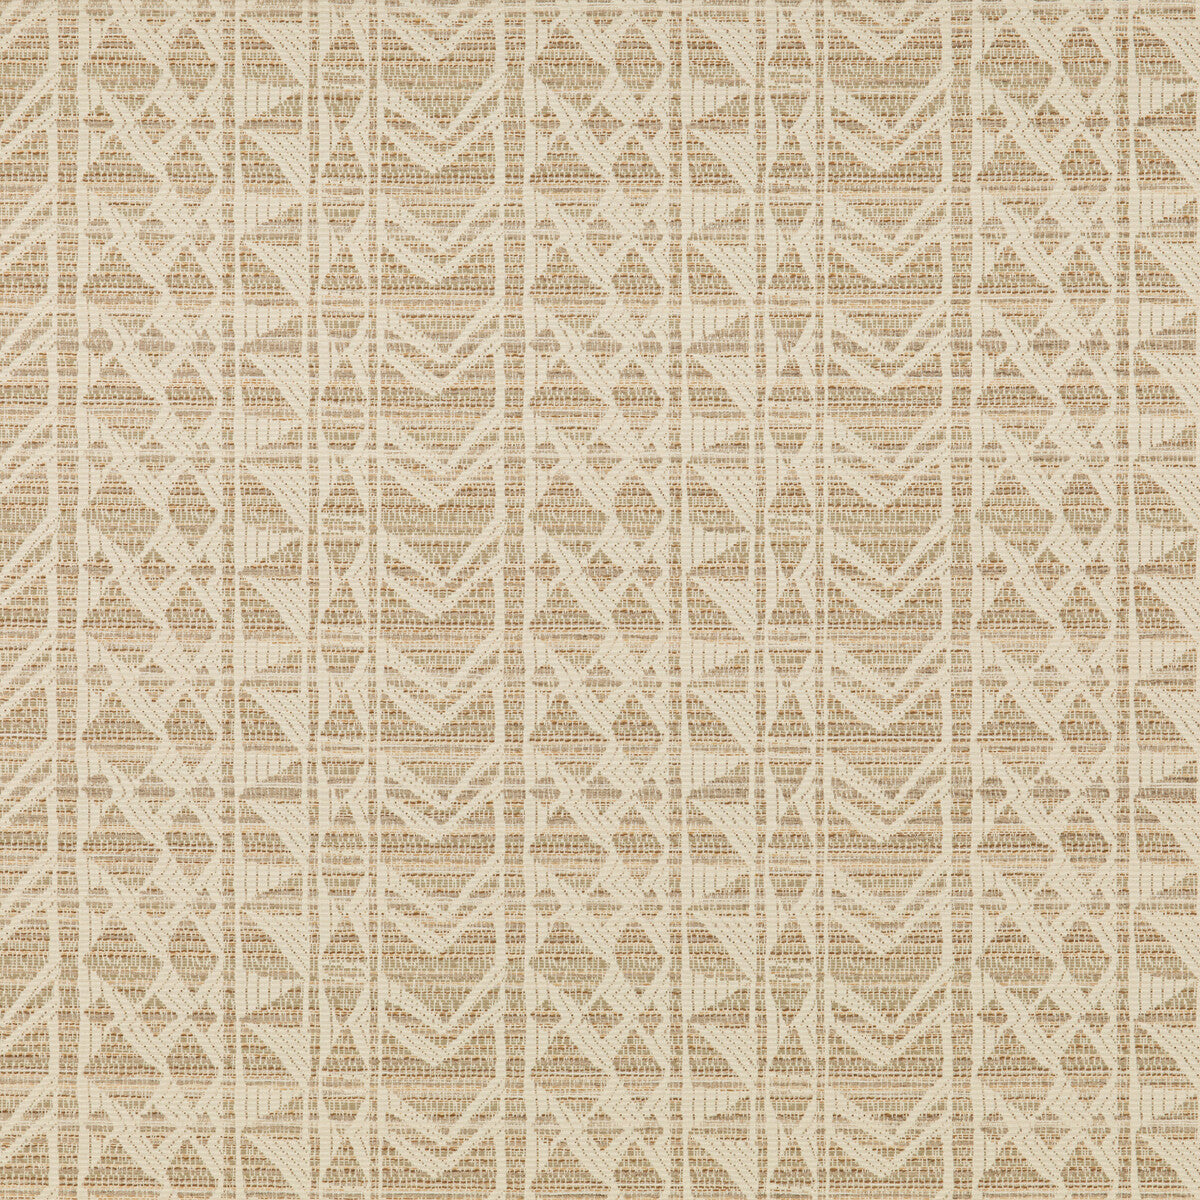 Butabu fabric in ivory color - pattern ED85318.104.0 - by Threads in the Luxury Weaves II collection